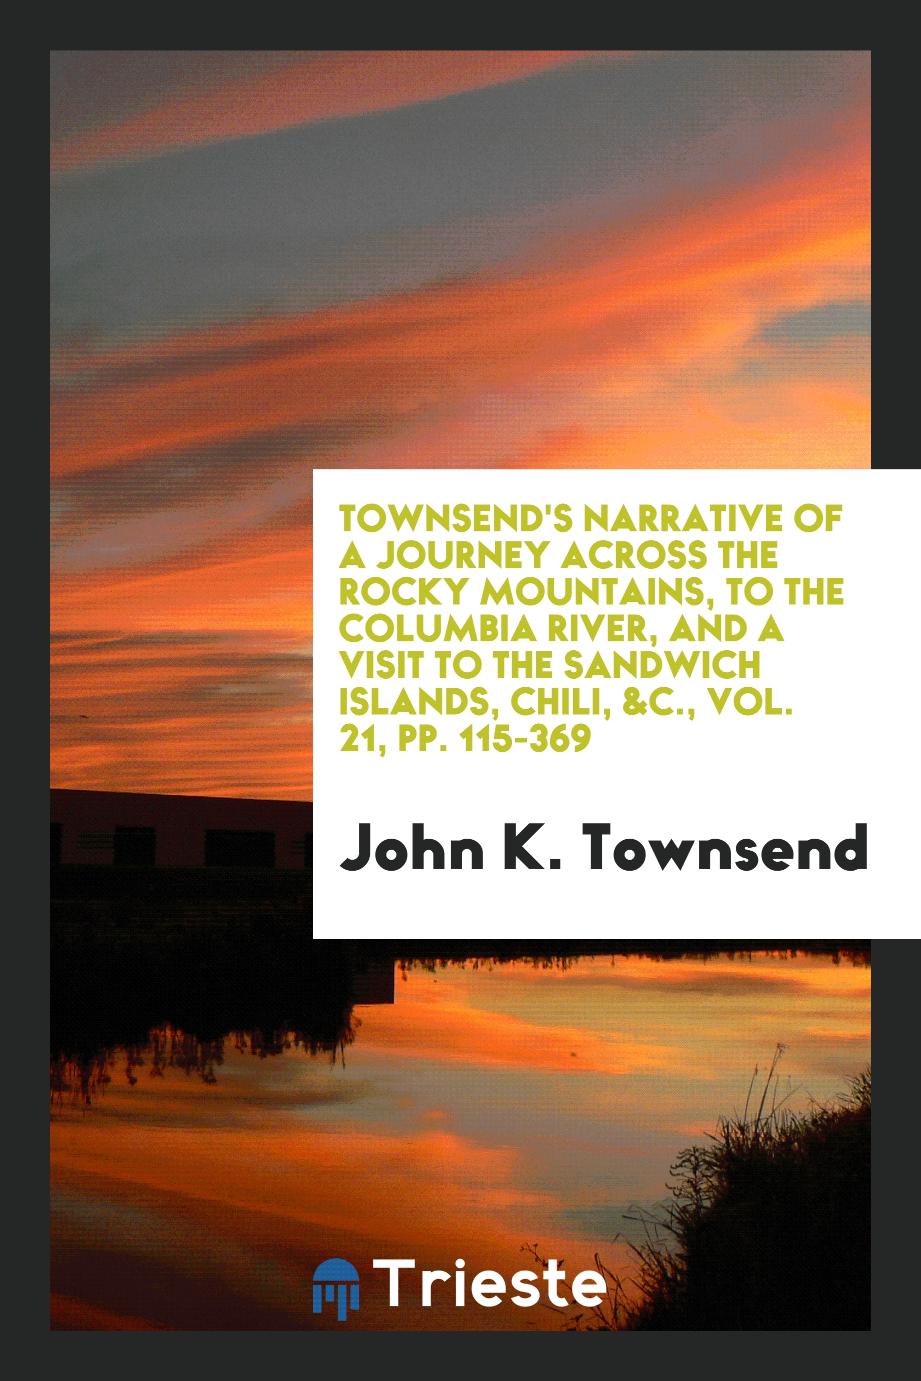 Townsend's Narrative of a journey across the Rocky Mountains, to the Columbia River, and a visit to the sandwich islands, Chili, &c., Vol. 21, pp. 115-369